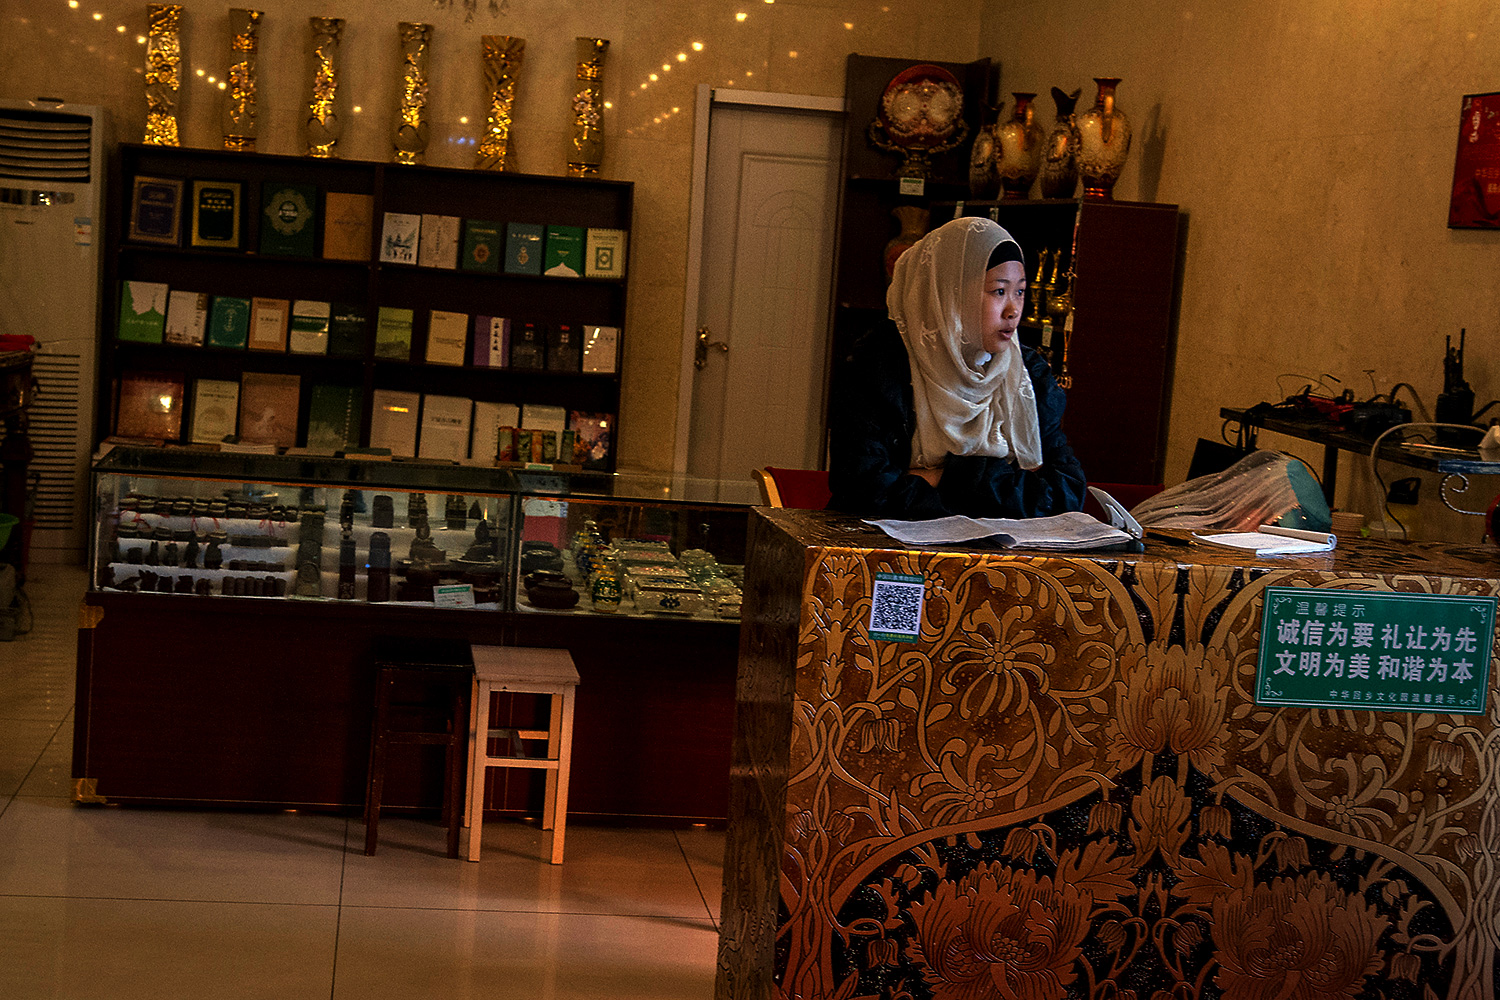 A receptionist inside the Aisha Palace waits to greet visitors. The palace serves as a temporary museum until construction of the main museum is complete.